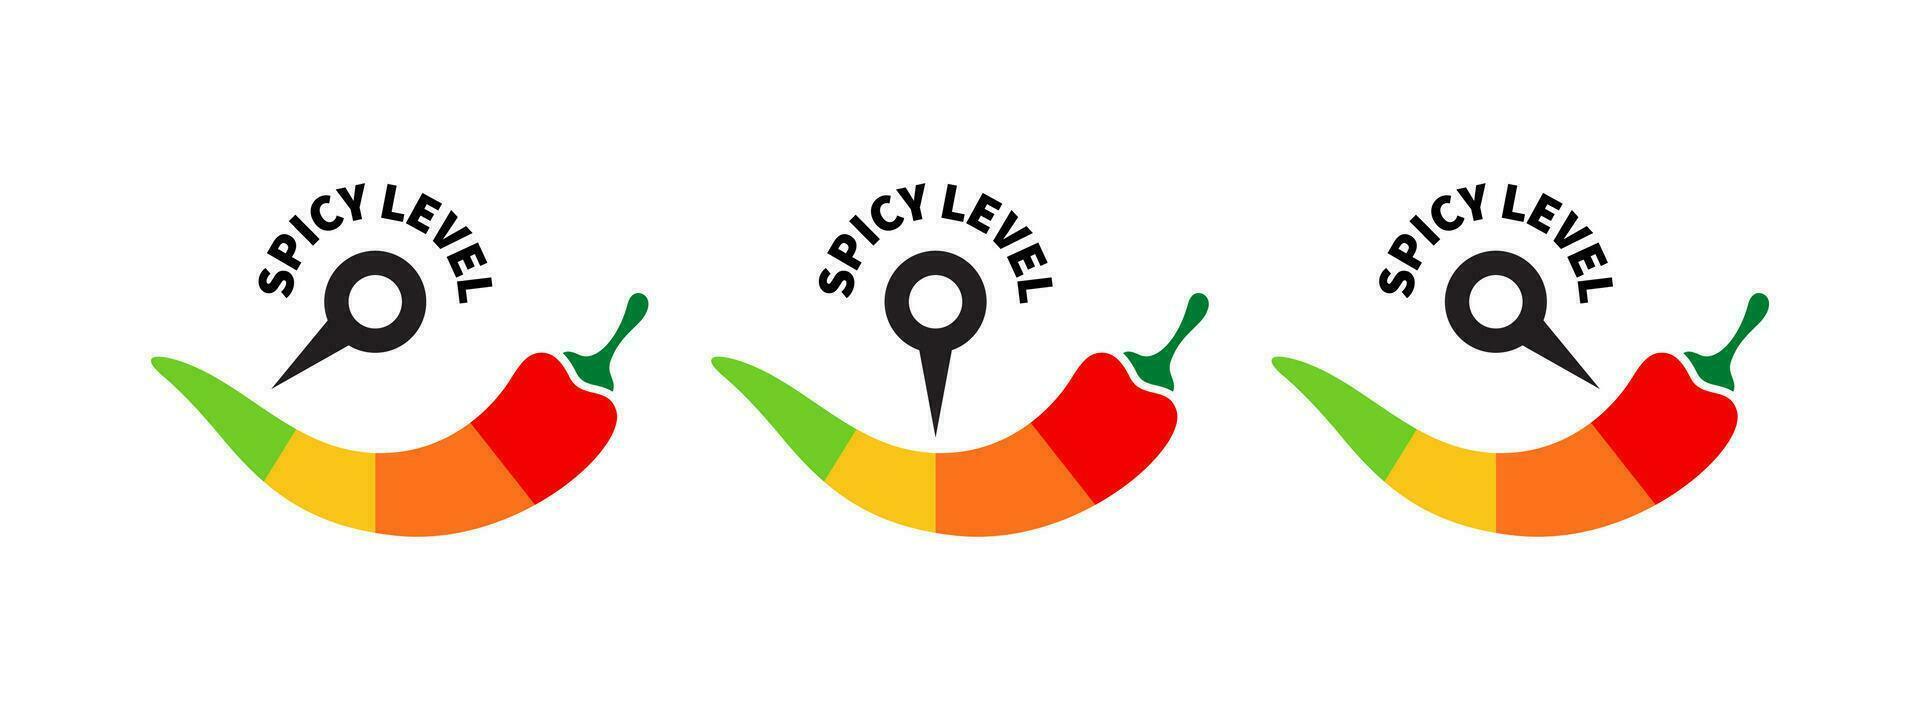 Spicy level scale. Product spicy degree symbols. Spicy flavor level. Vector scalable graphics